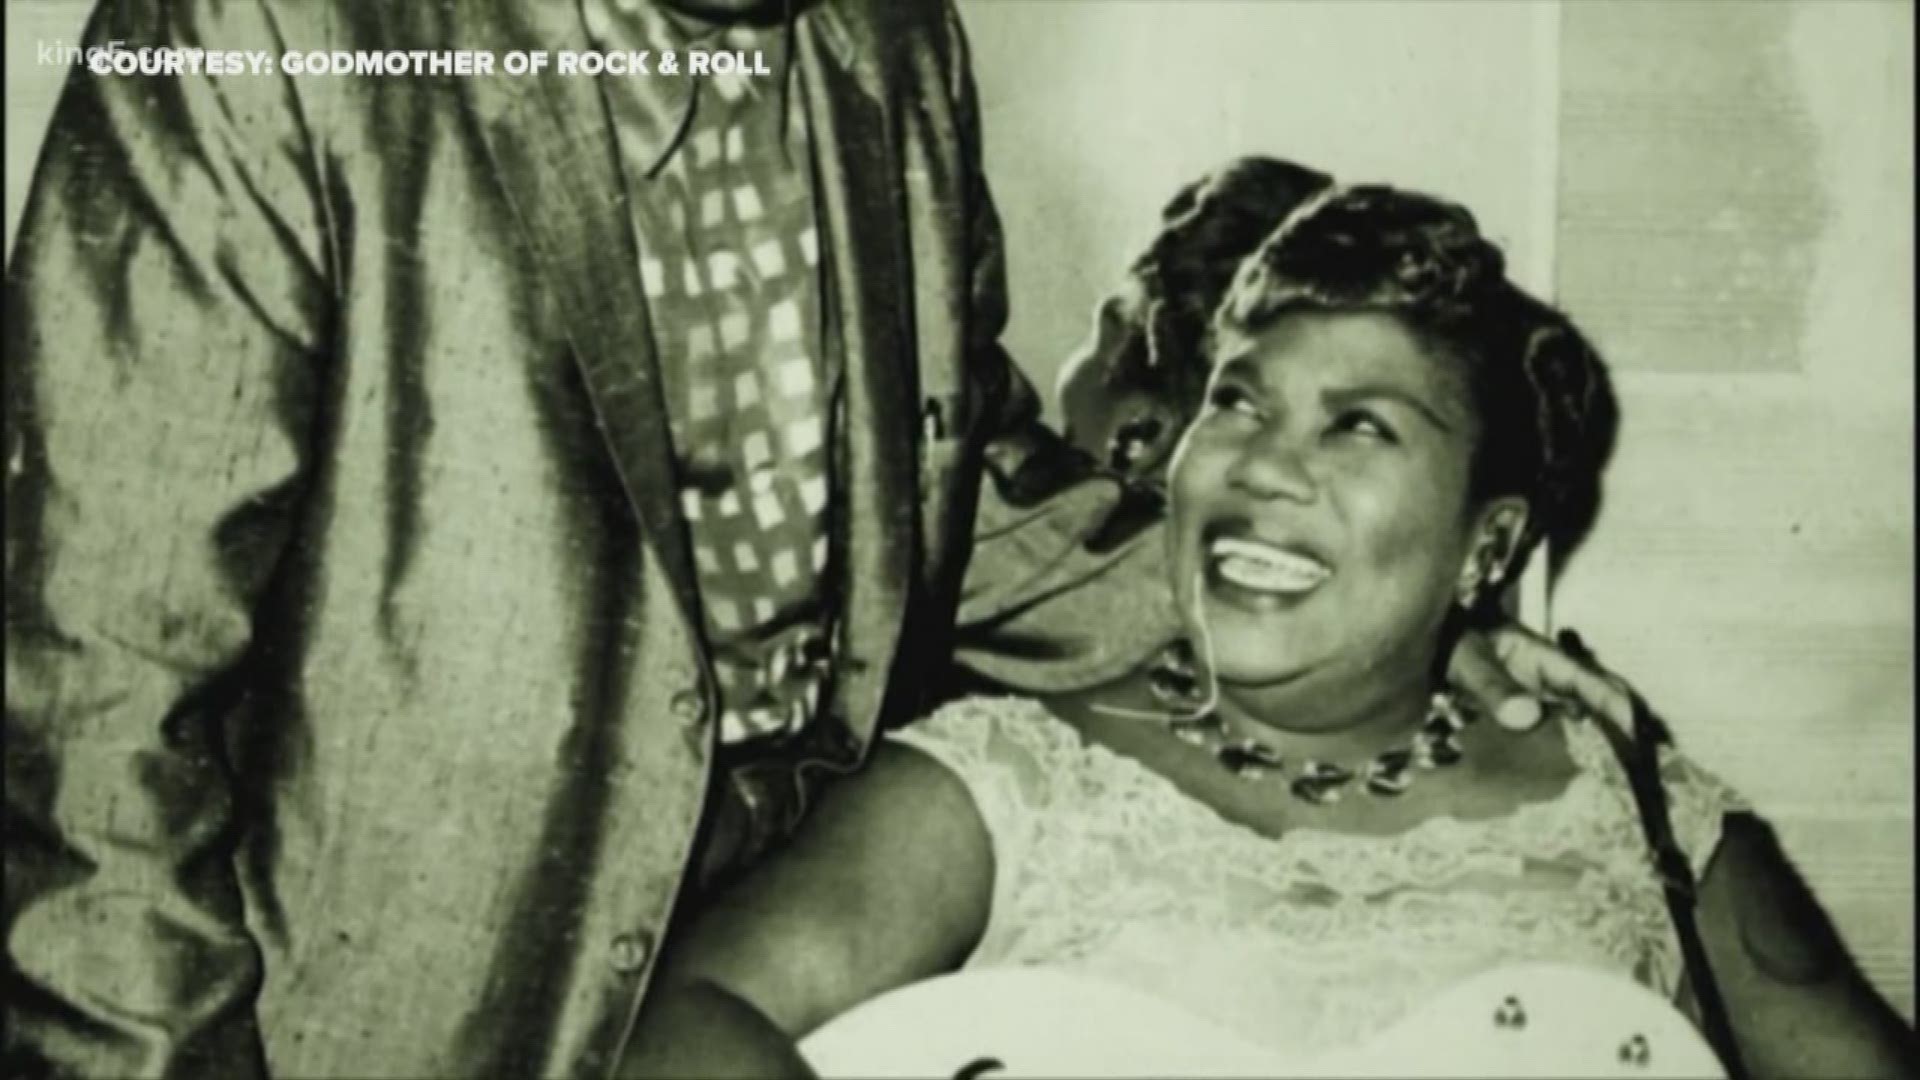 The godmother of rock and roll Sister Rosetta Tharpe influenced many early rock and roll stars before being inducted into the Rock and Roll Hall of Fame.